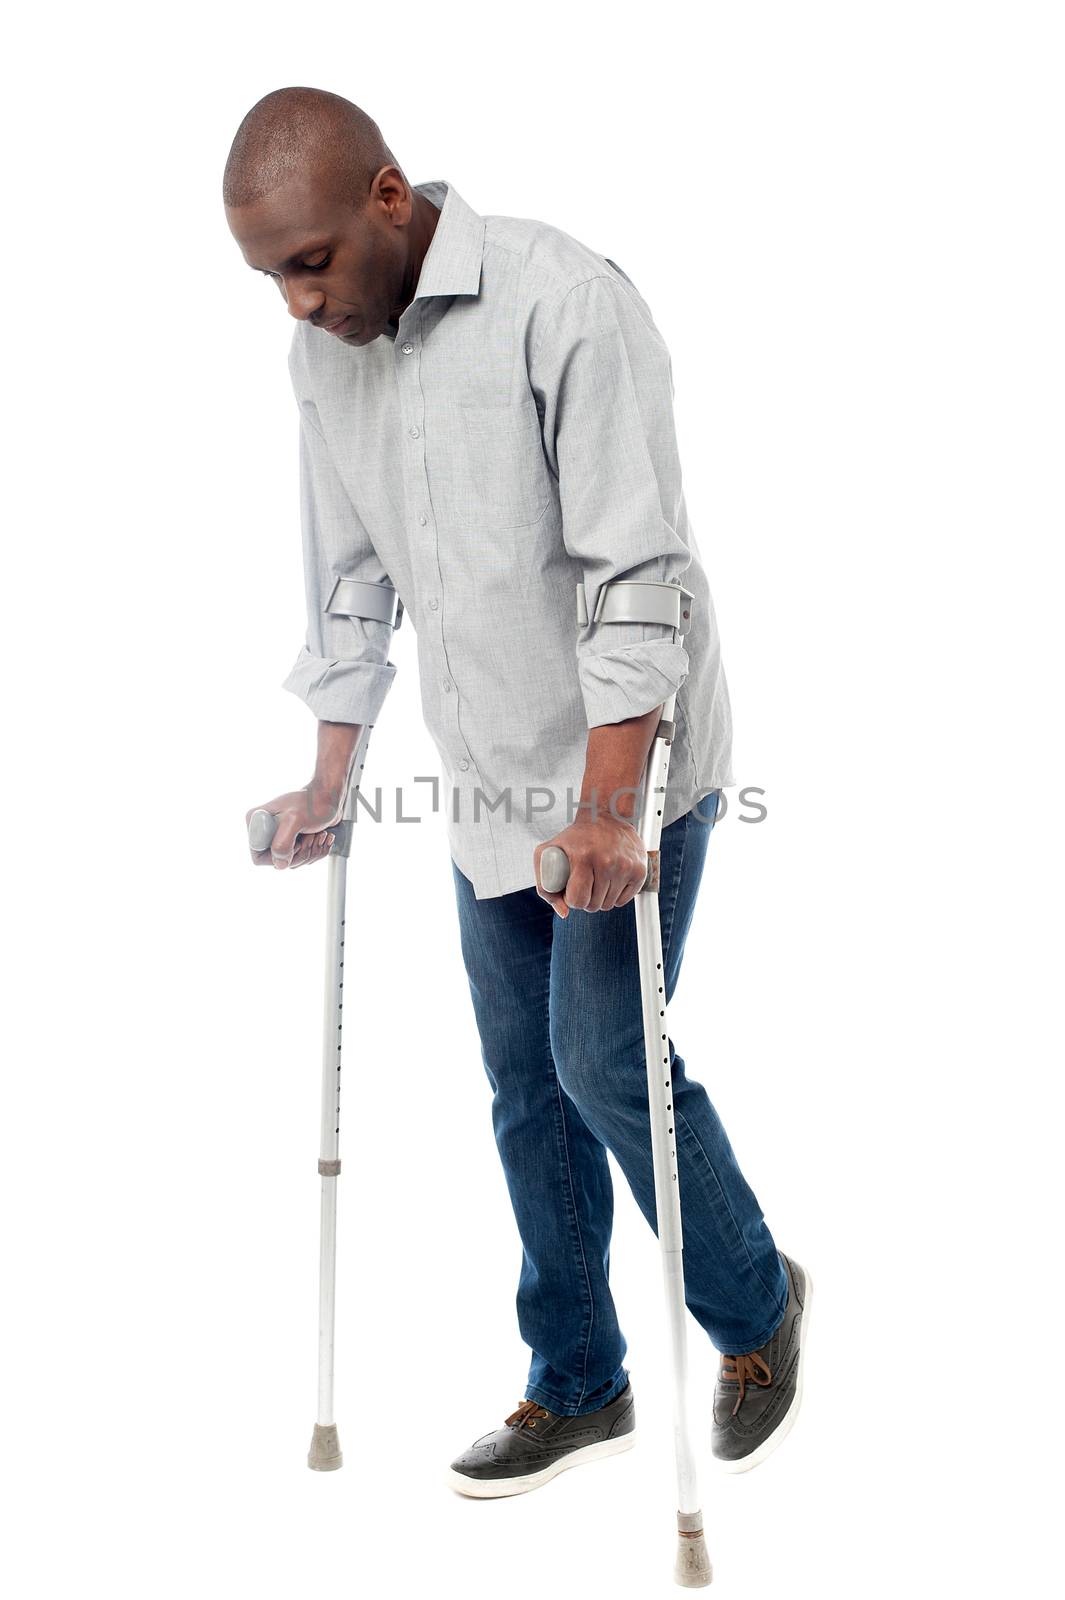 Man walking with crutches isolated on a white